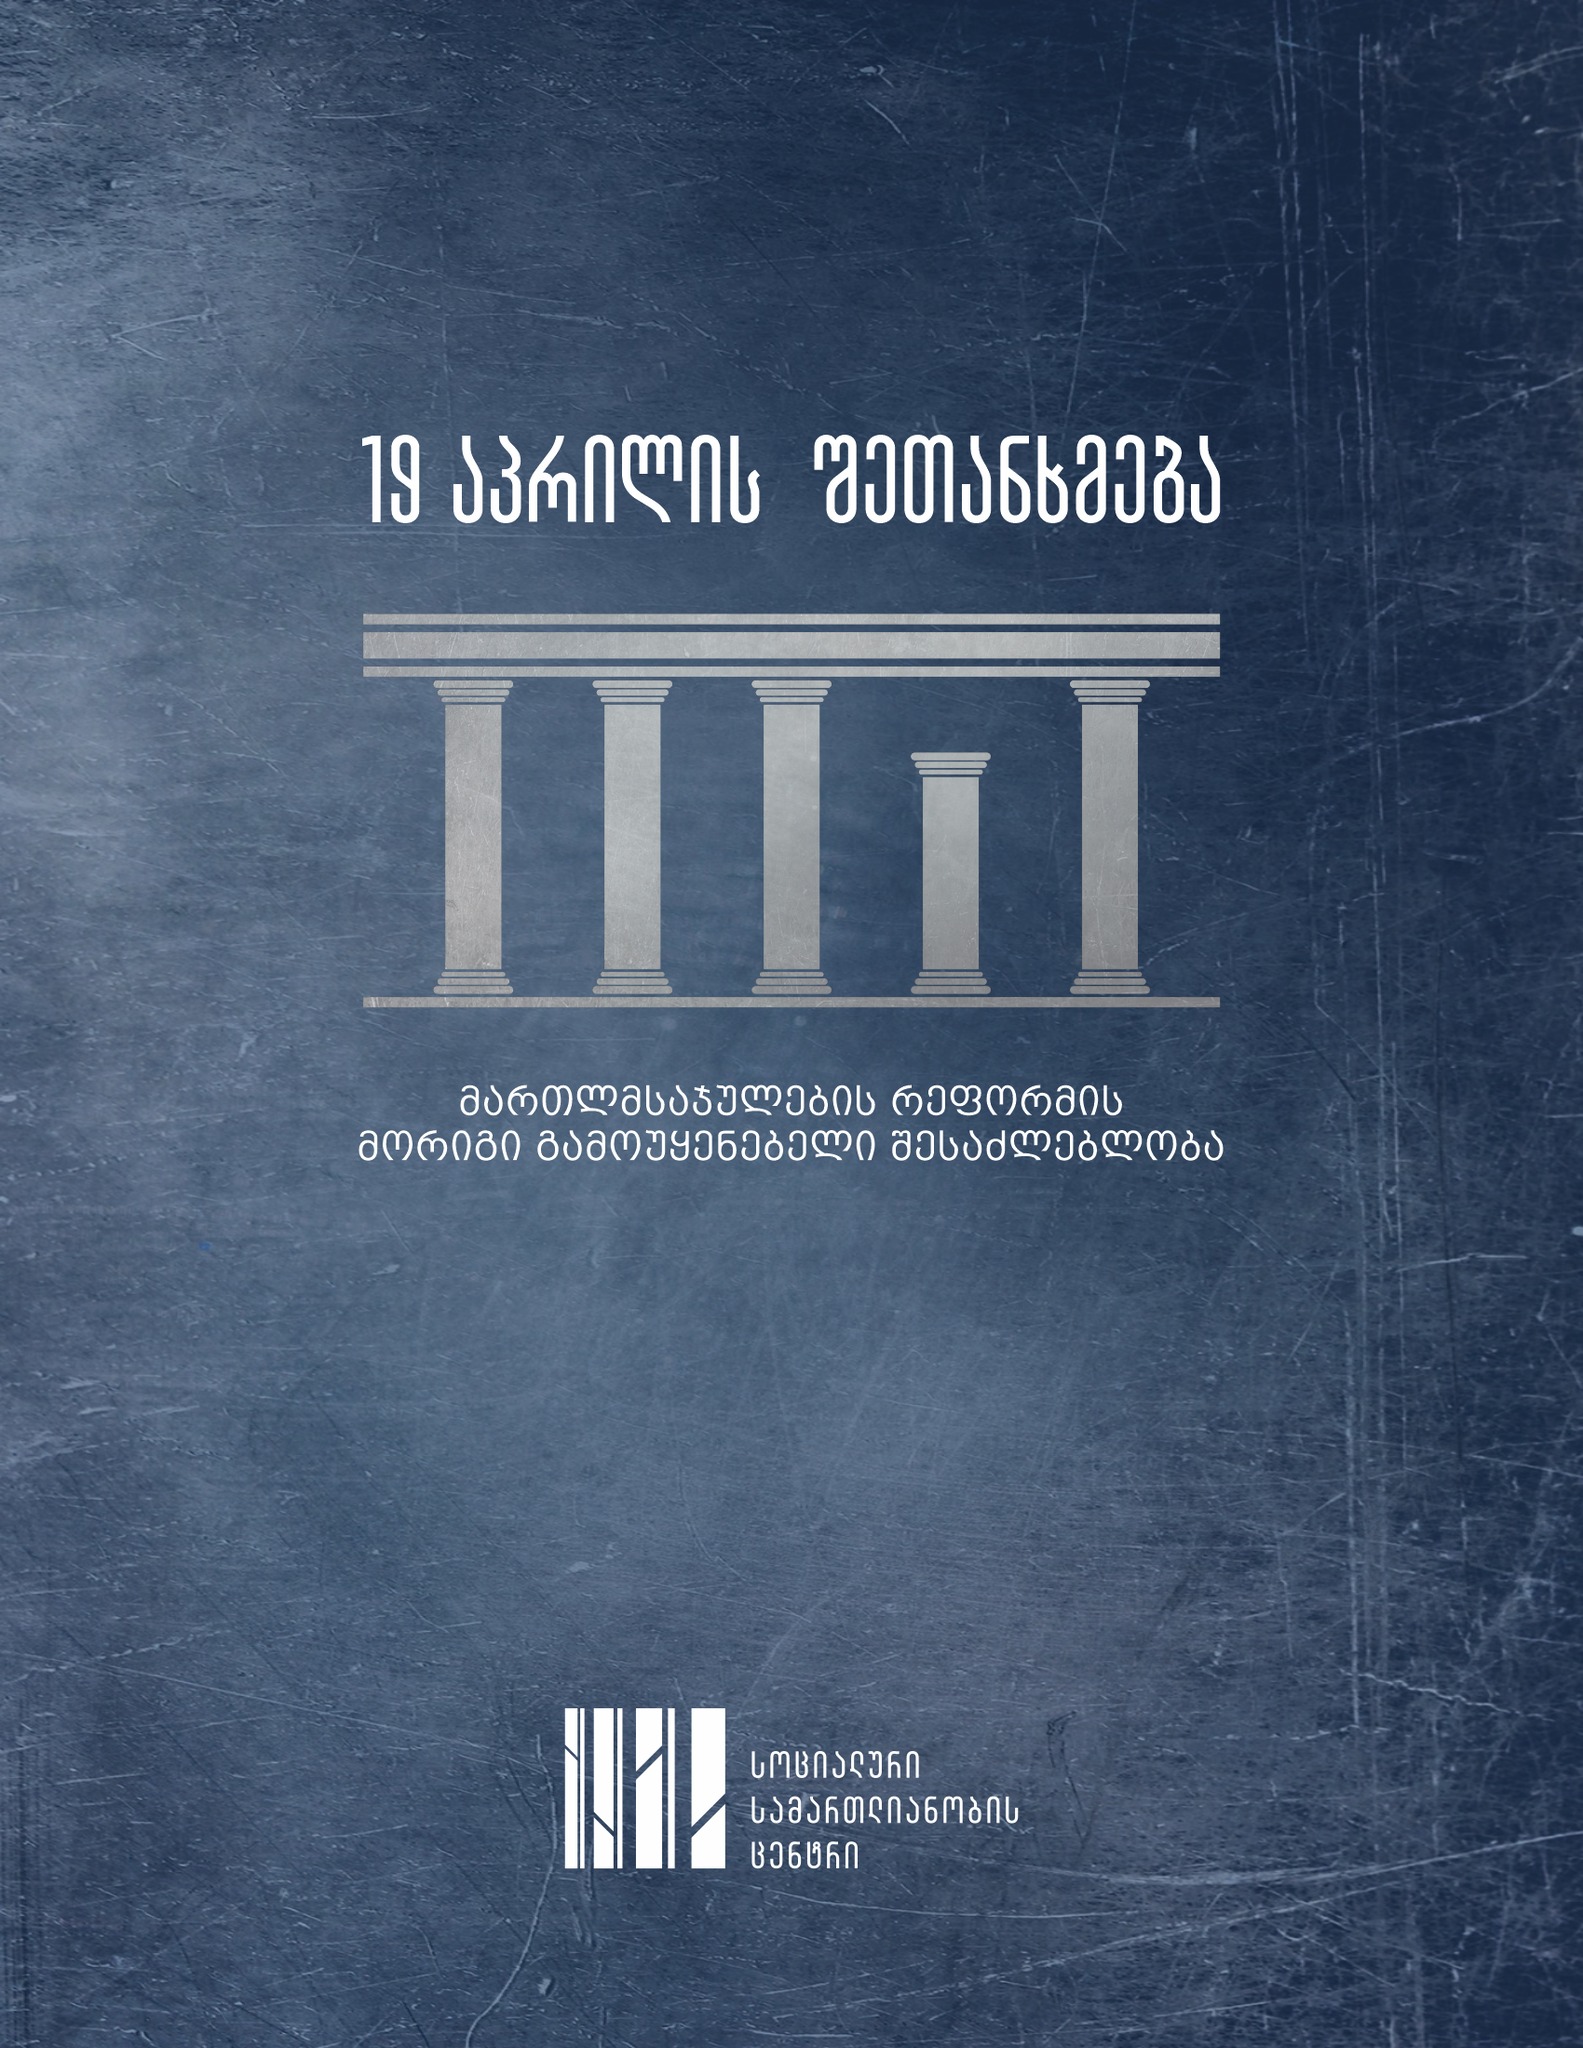 April 19 Agreement - another missed opportunity for judicial reform